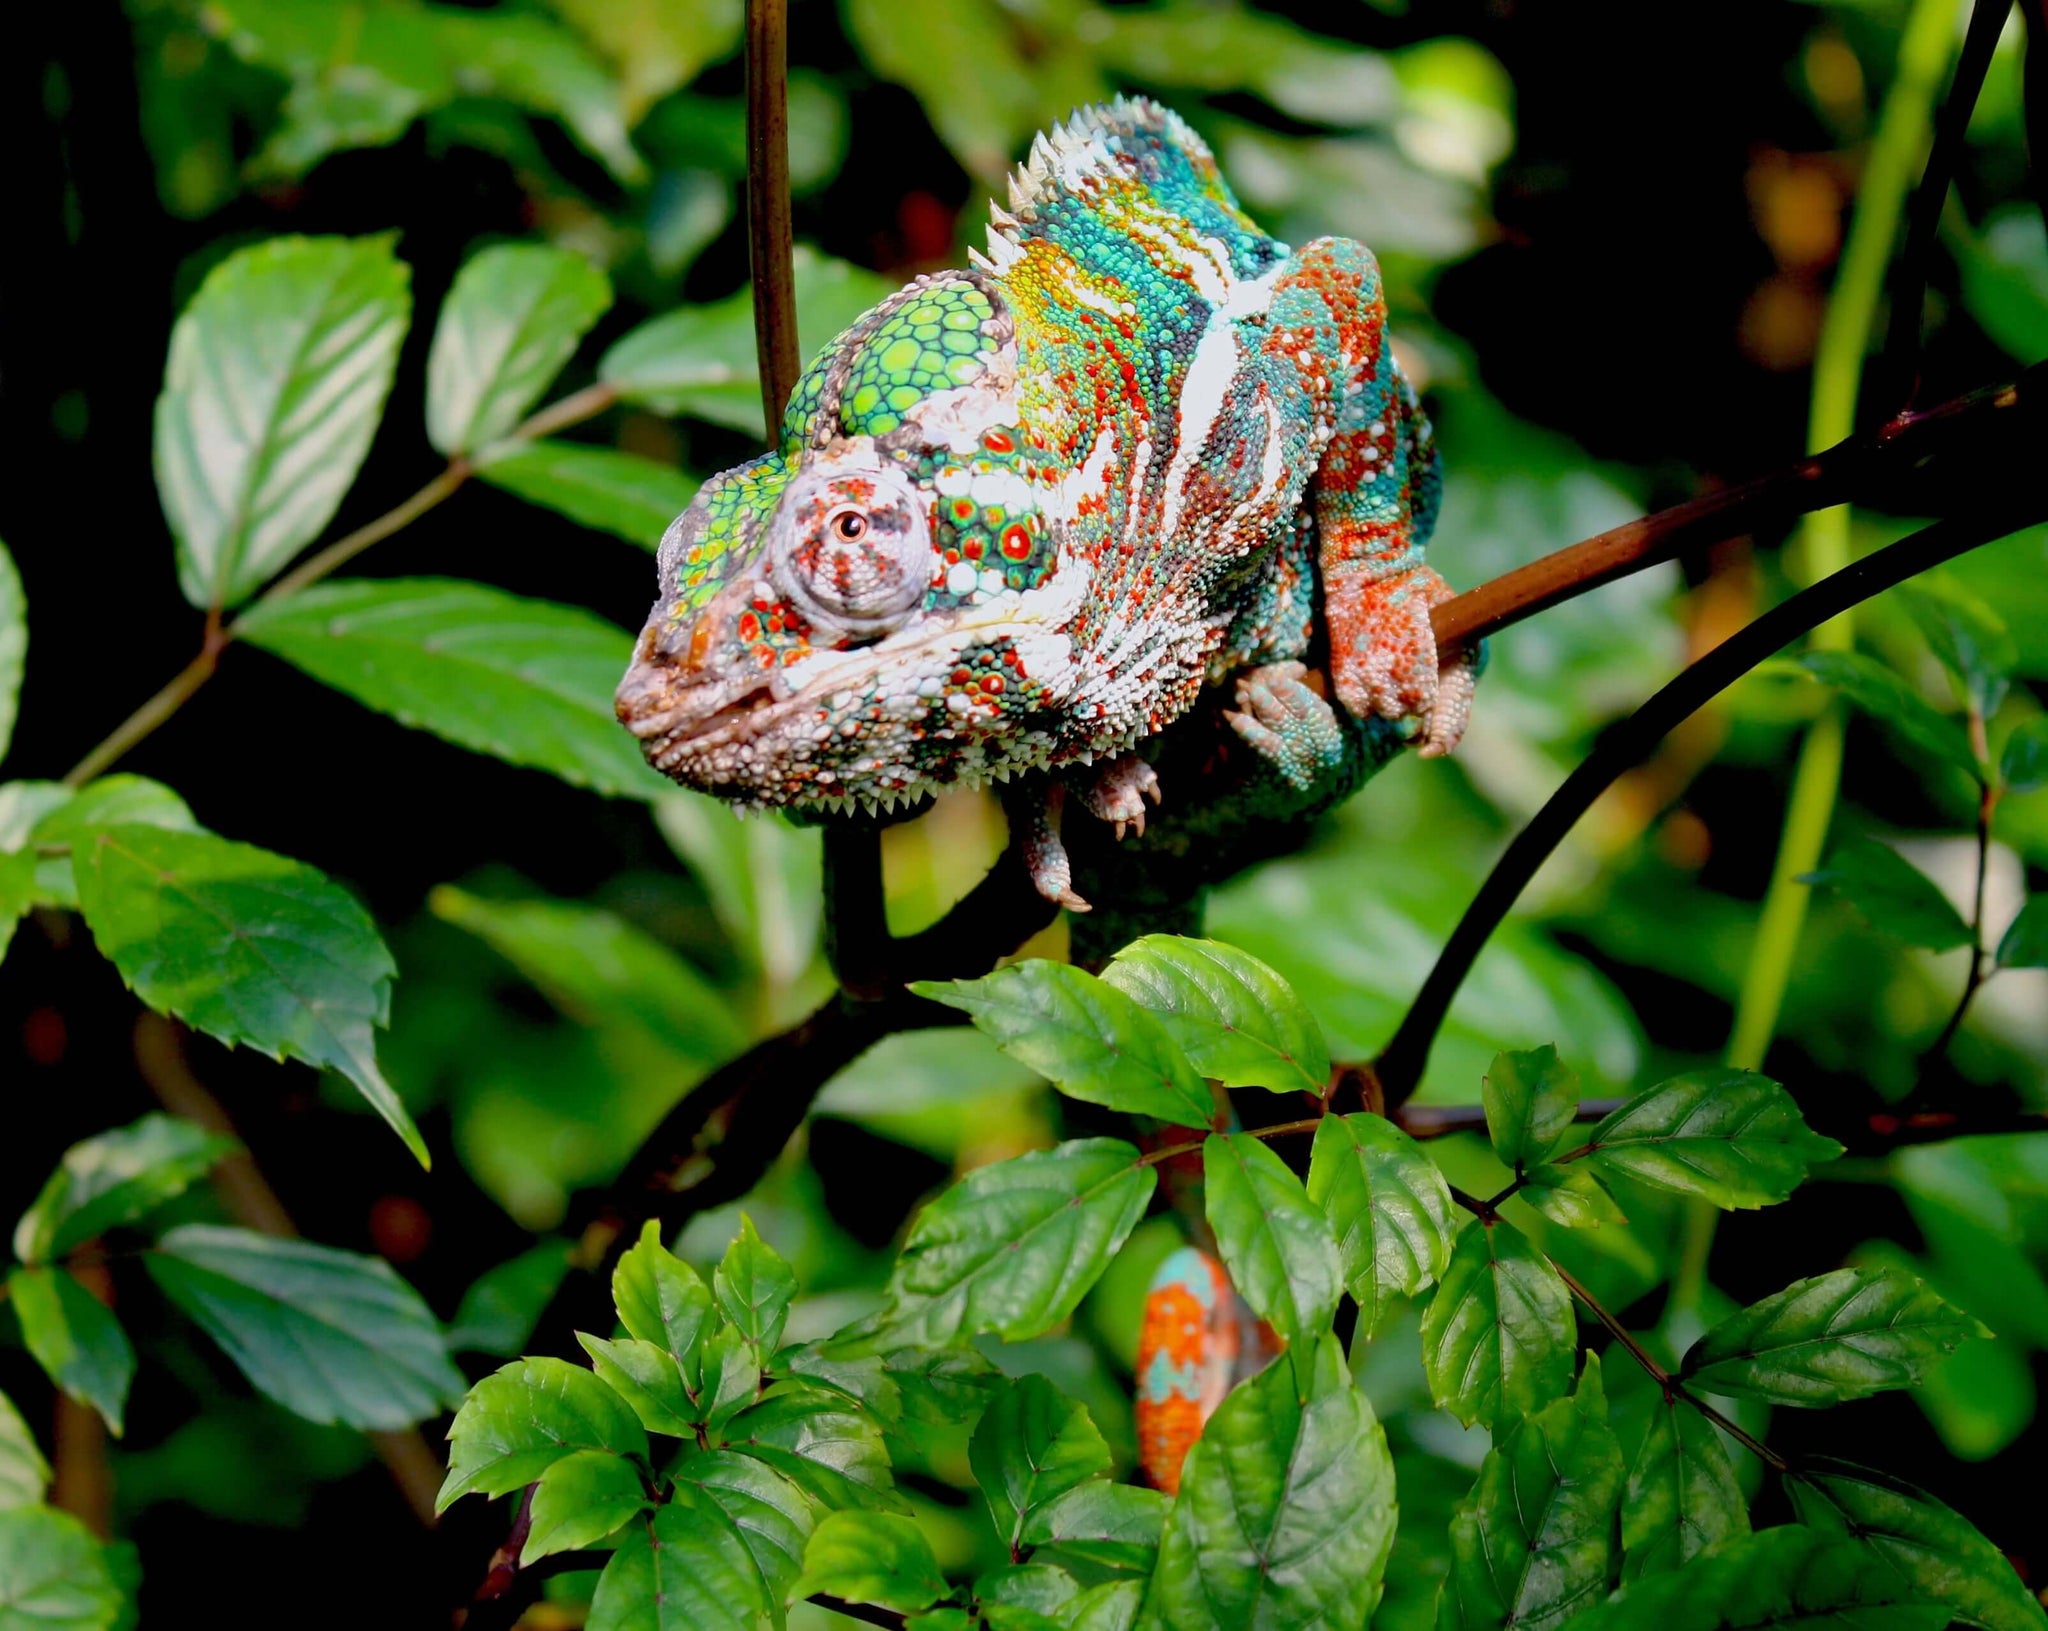 (Chameleon) The Anguish of Abundant and Mismatched Information - STOCKHOLM REPTILES INSIGHT